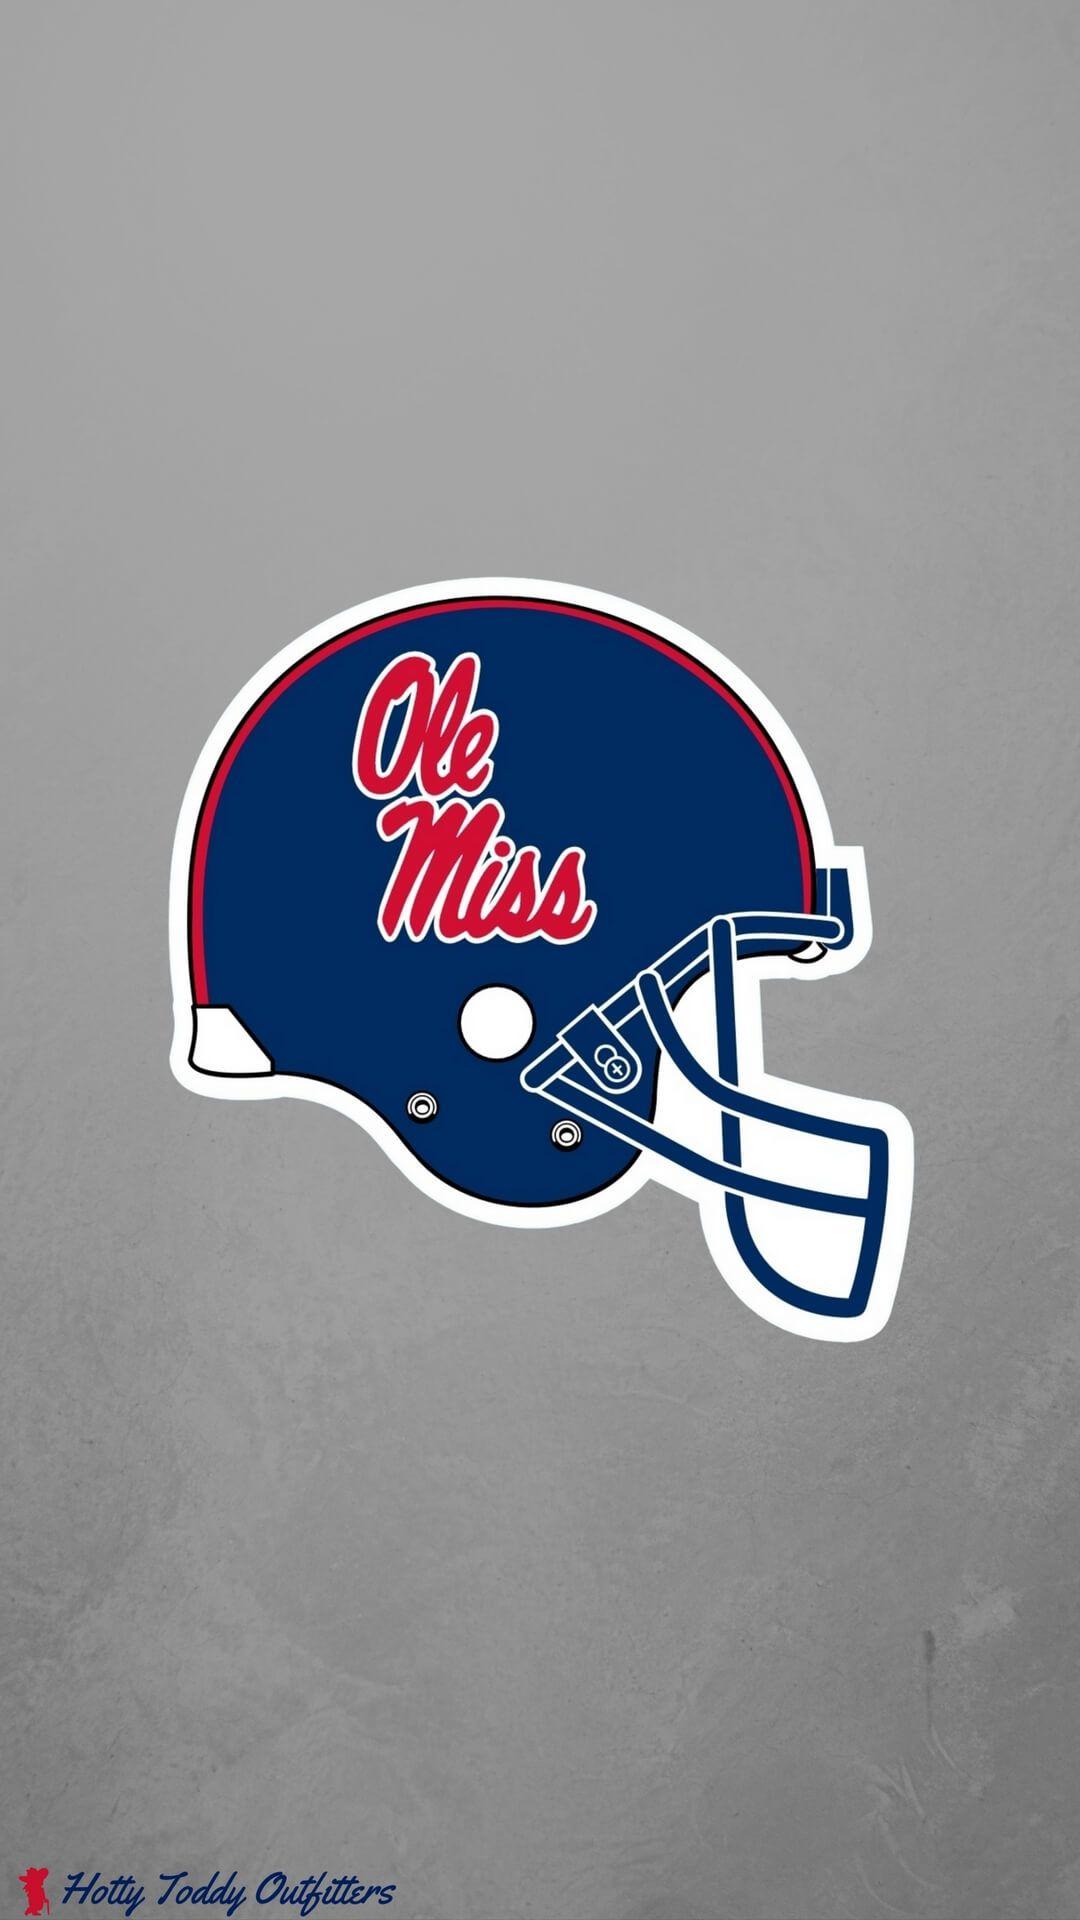 iPhone Wallpaper for Ole Miss Fans ⋆ Hotty Toddy Outfitters